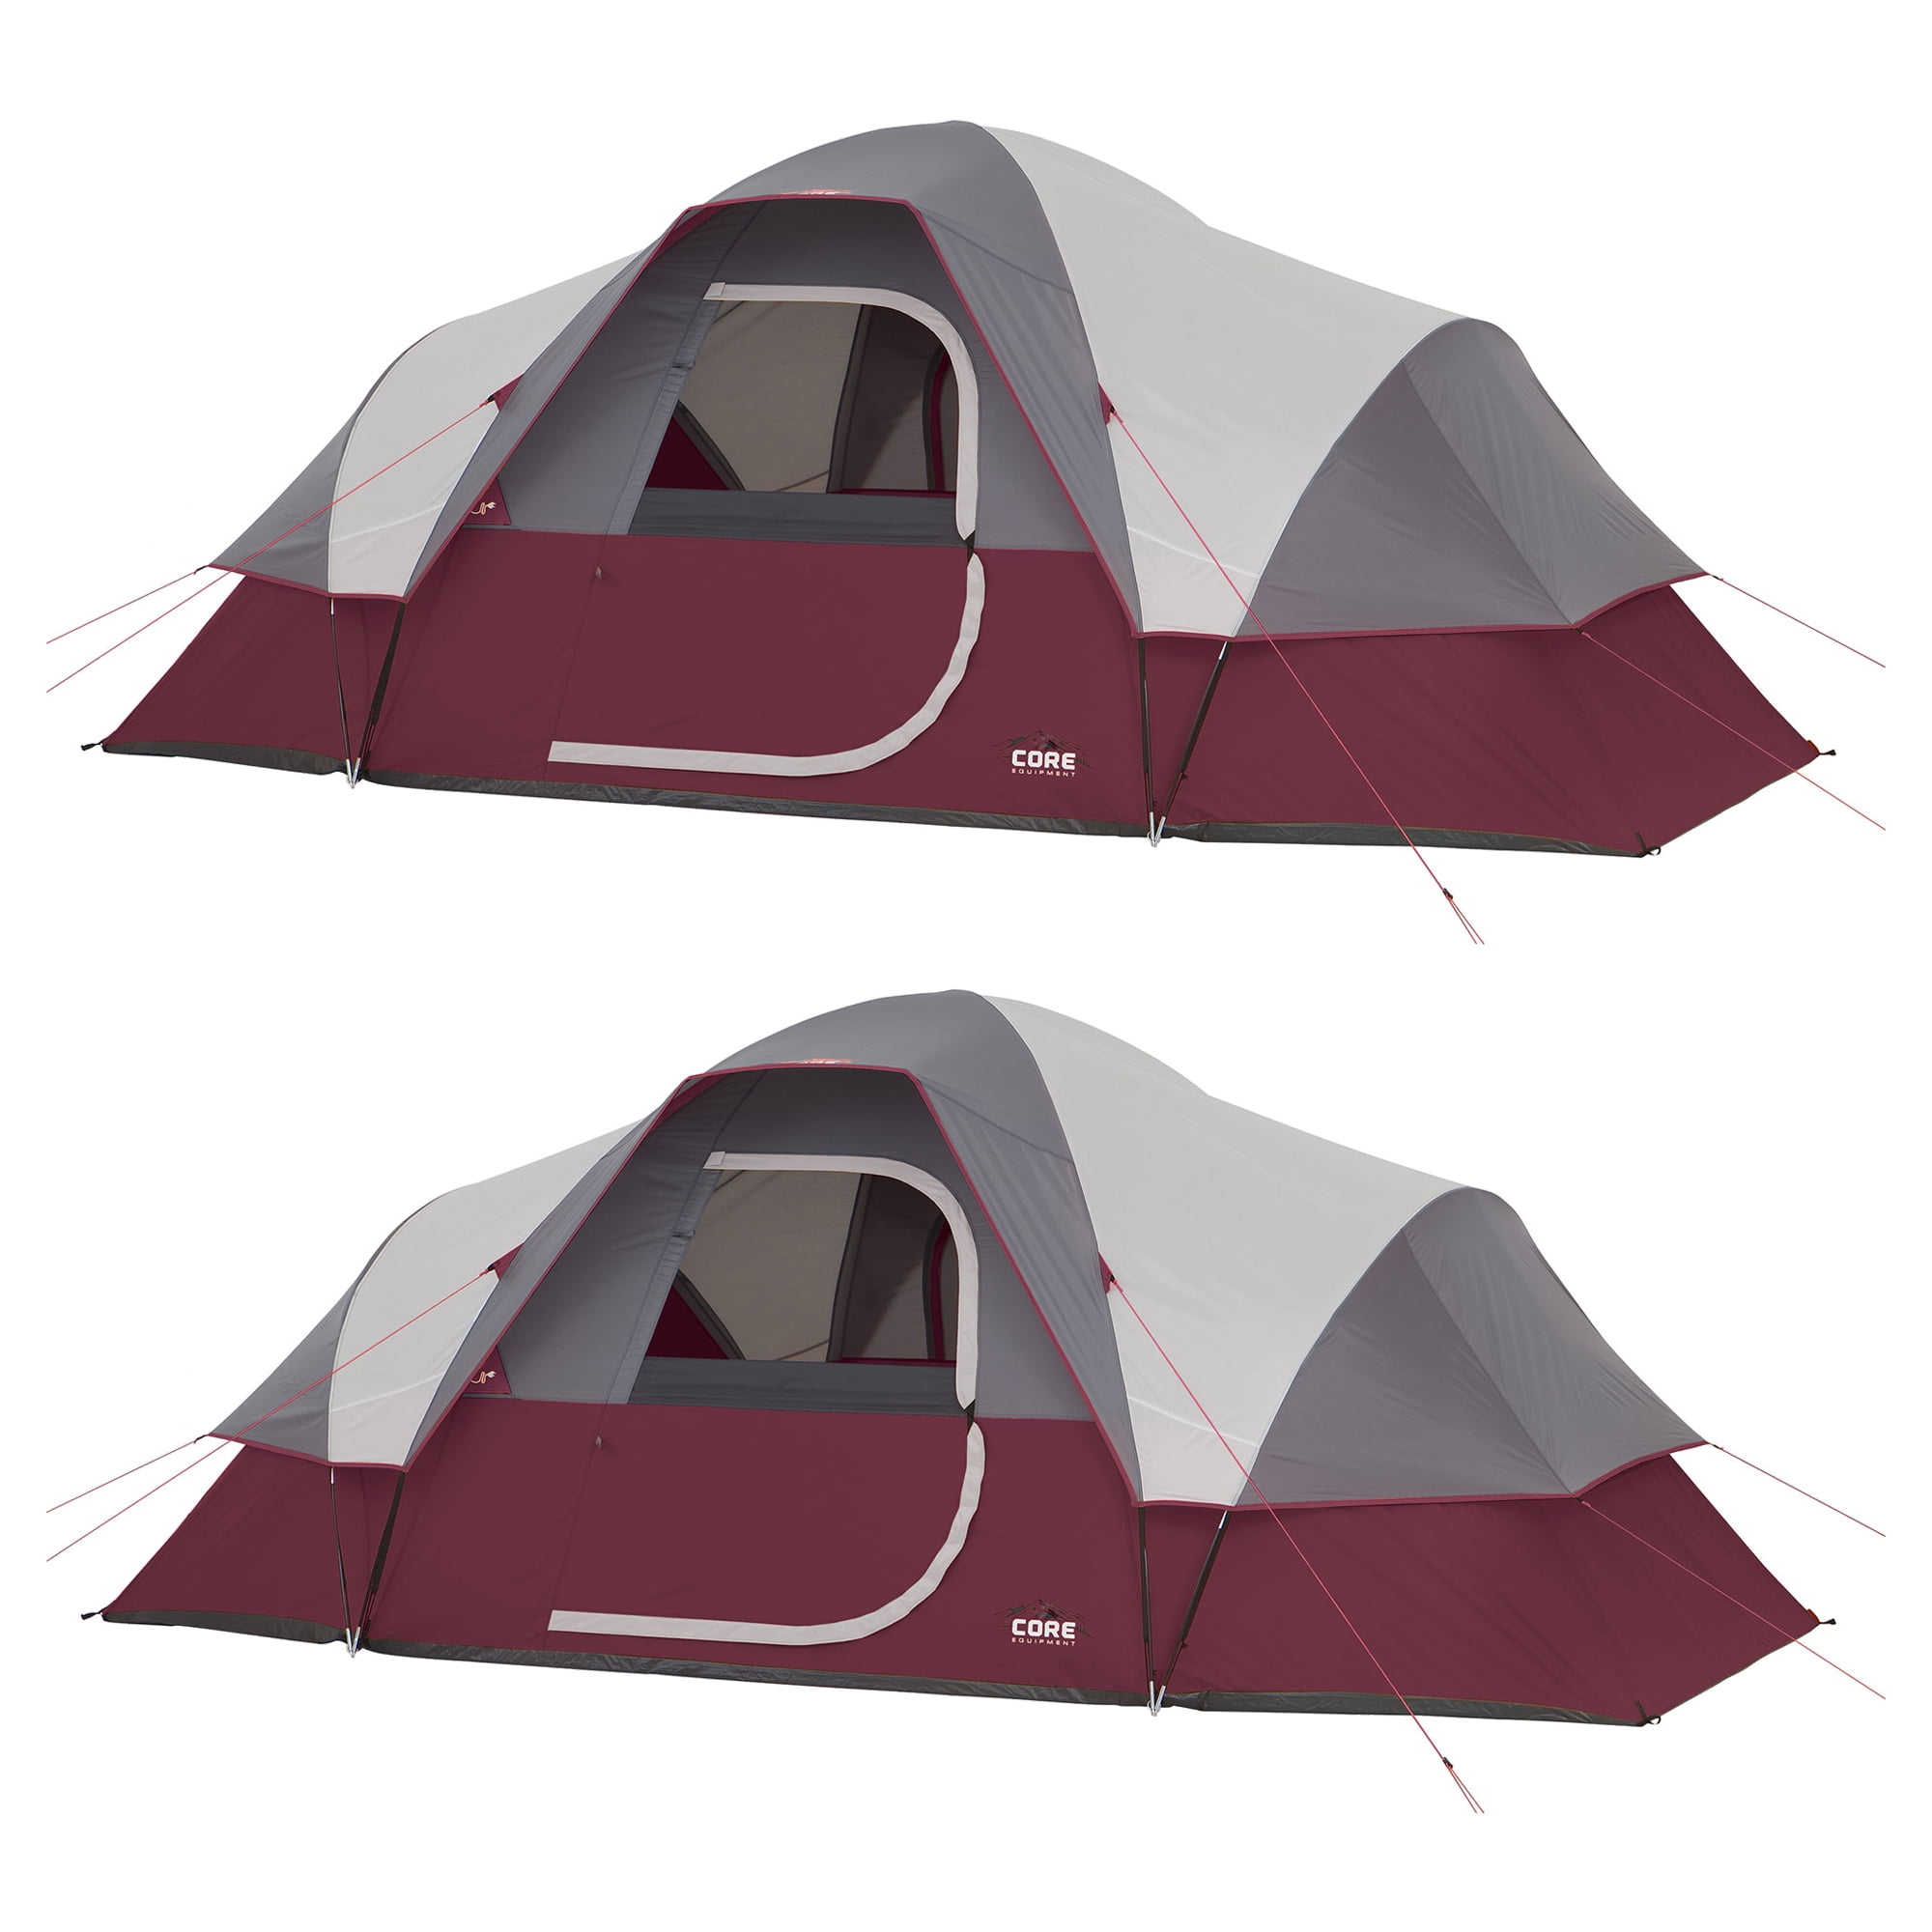 CORE Tents for Family Camping, Hiking and Backpacking | 4 Person / 6 Person  / 9 Person / 11 Person Dome Camp Tents with Included Tent Gear Loft for